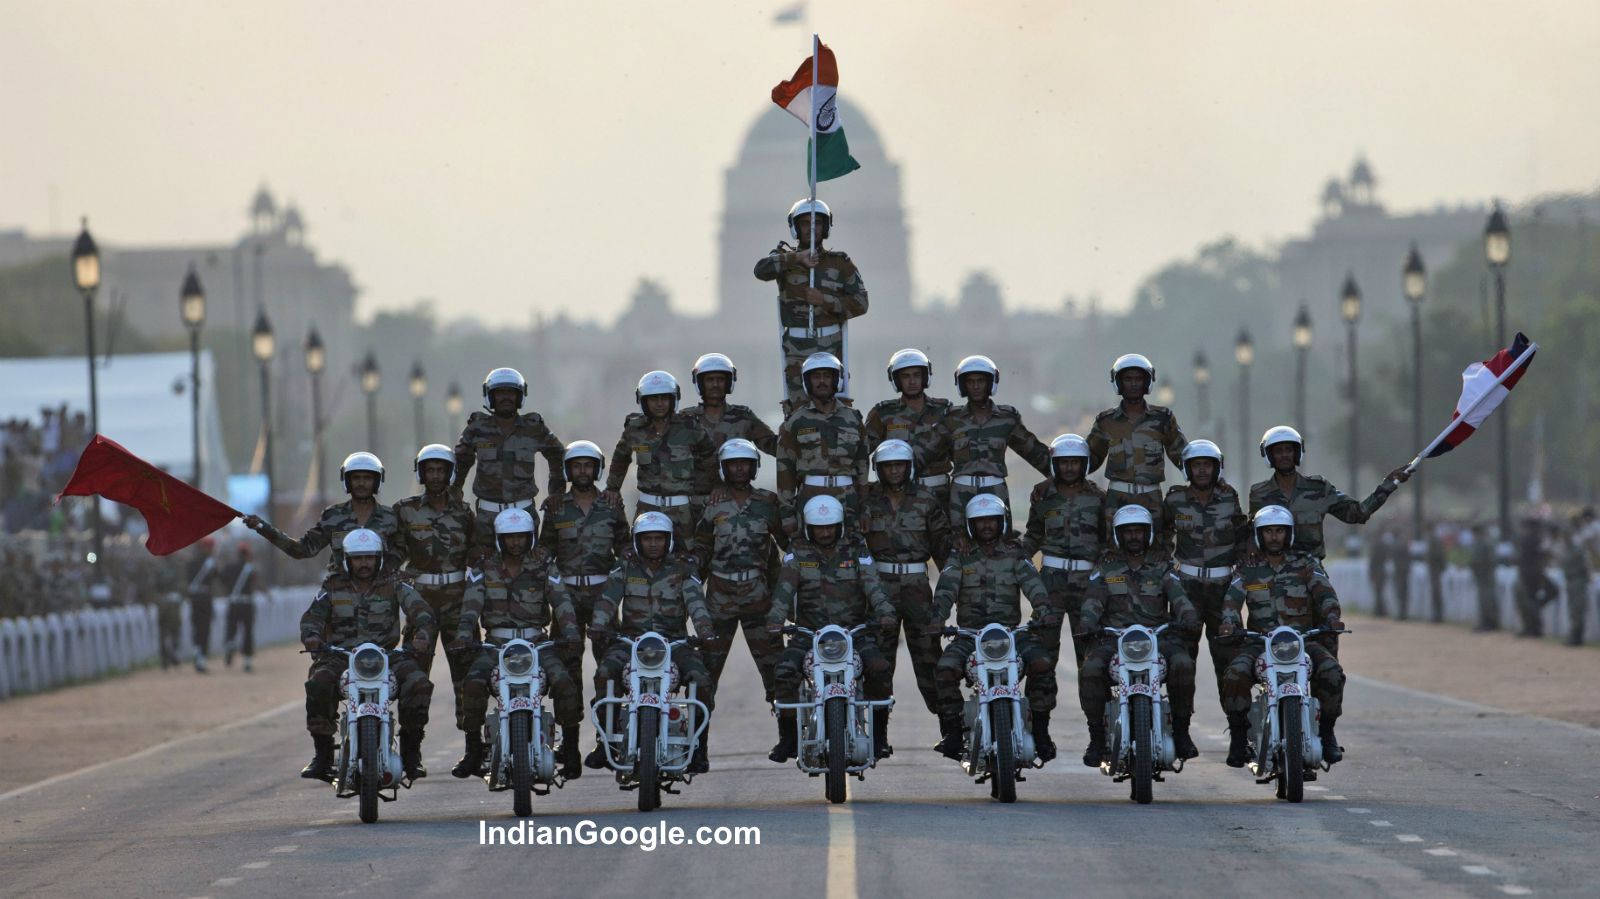 1600x899 Did You See These Shocking Indian Army Image & Wallpaper In Hd Quality Wallpaper